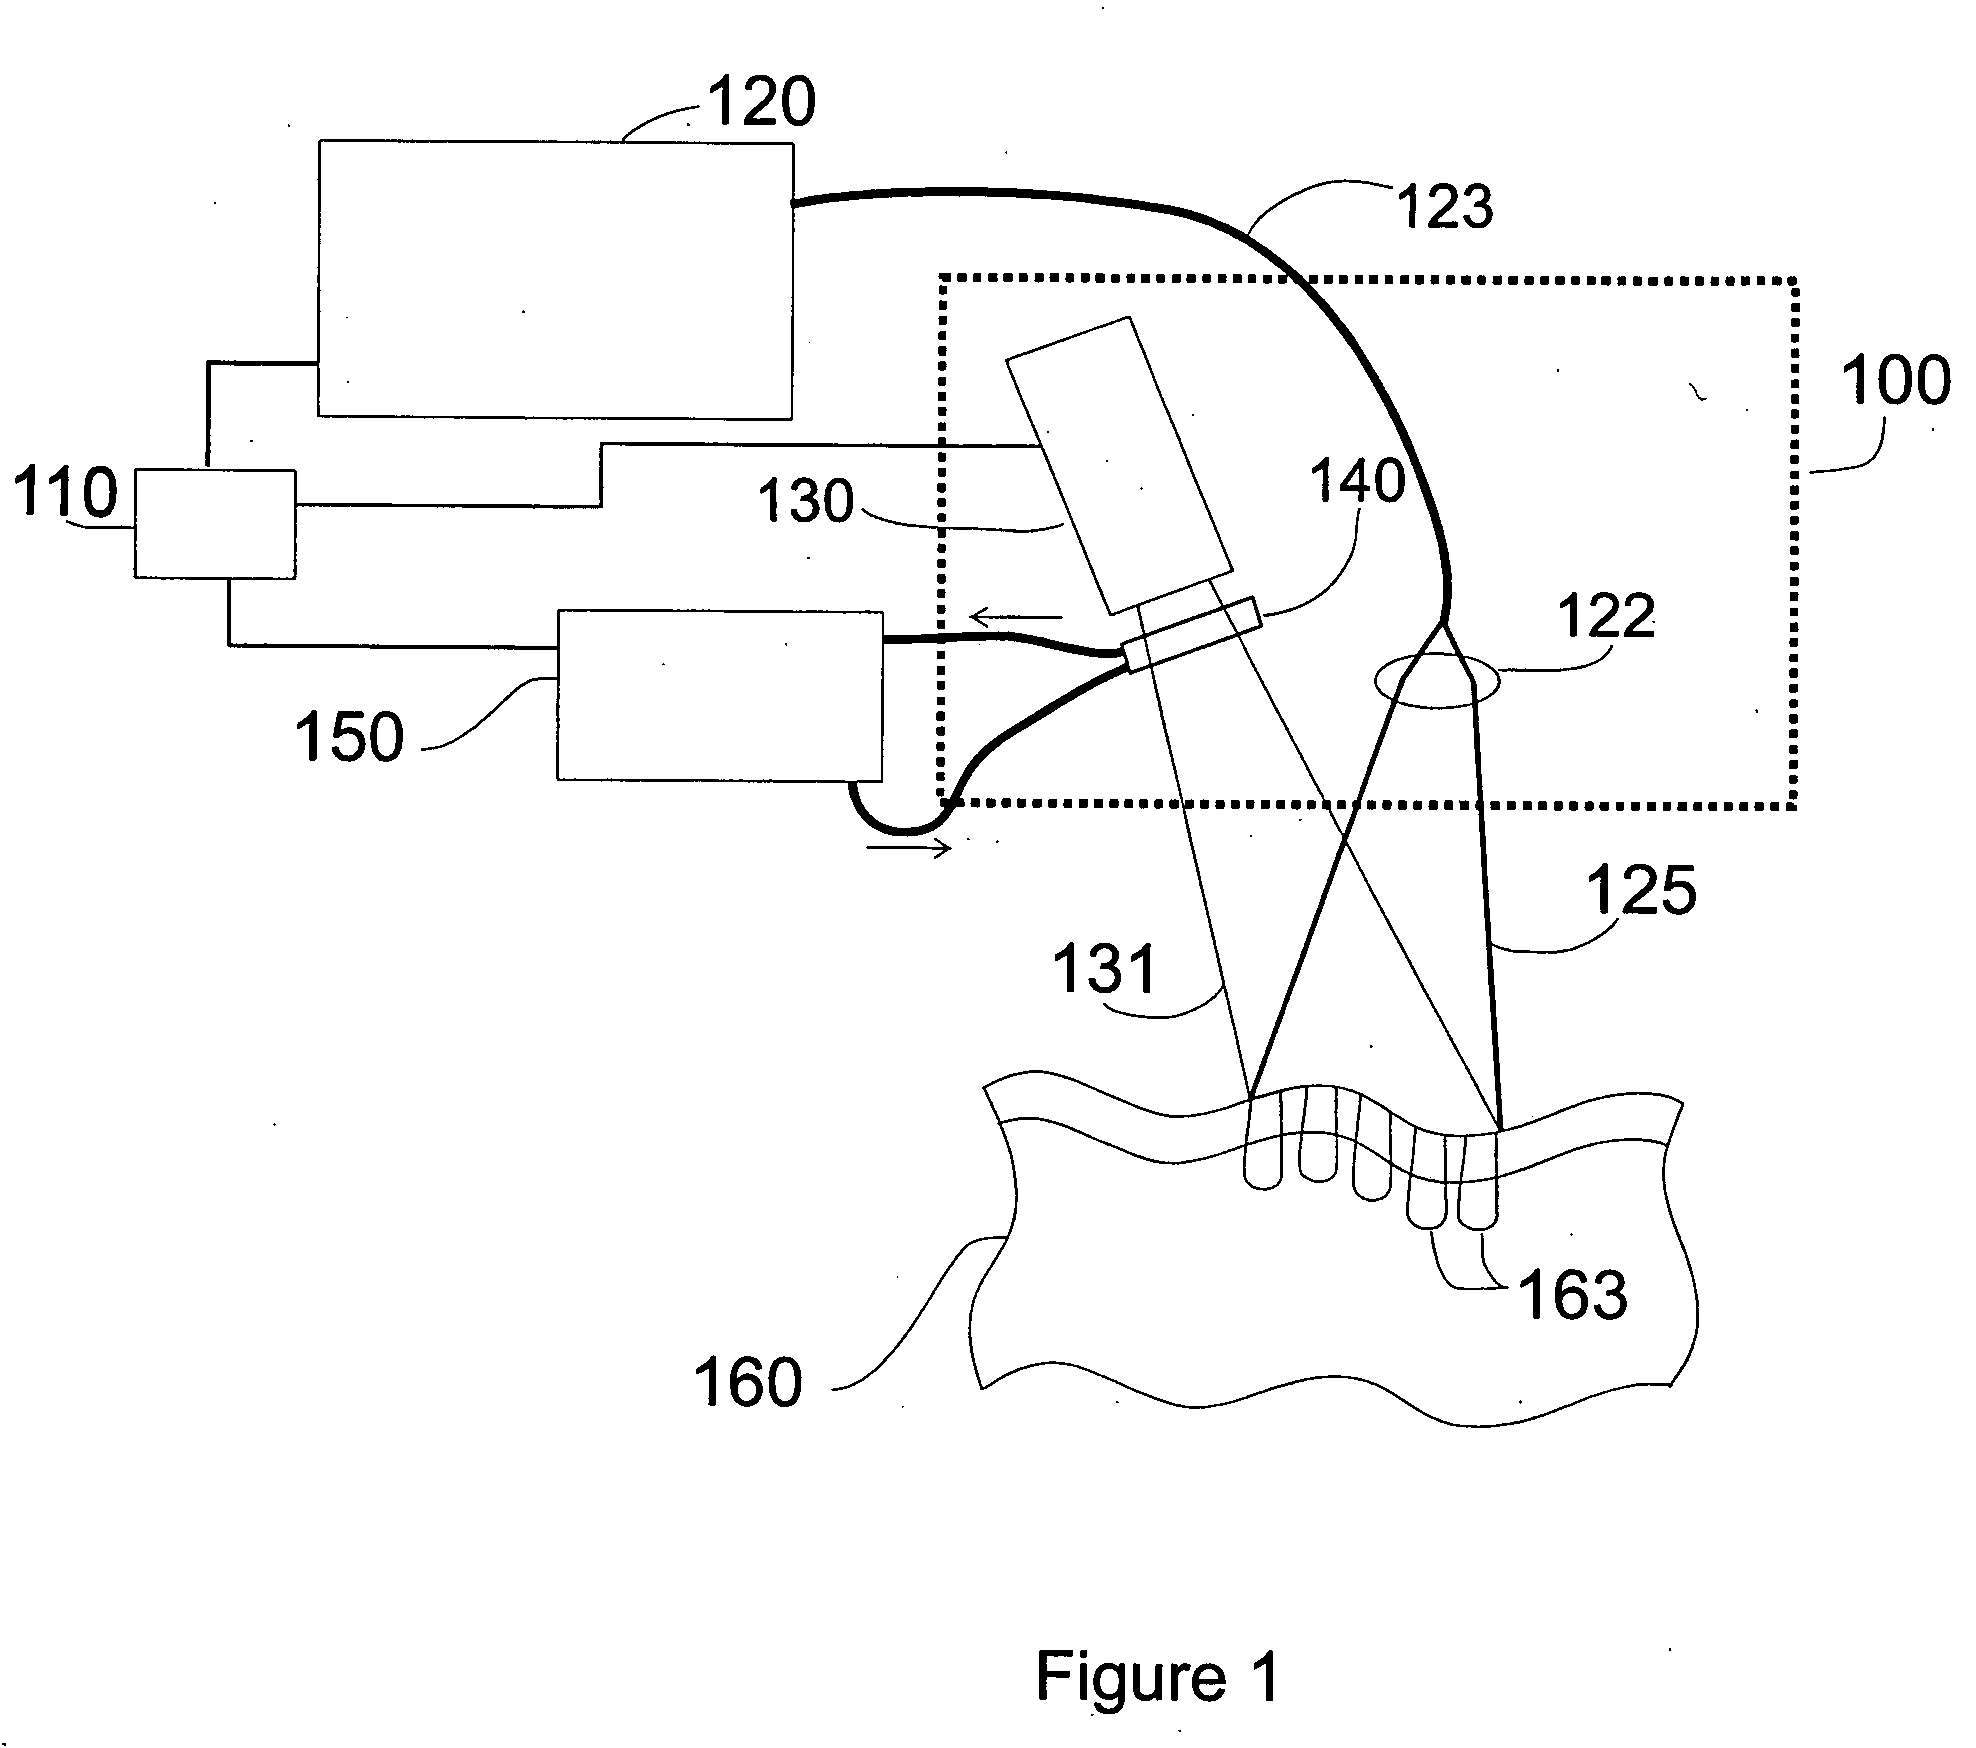 Patterned thermal treatment using patterned cryogen spray and irradiation by light